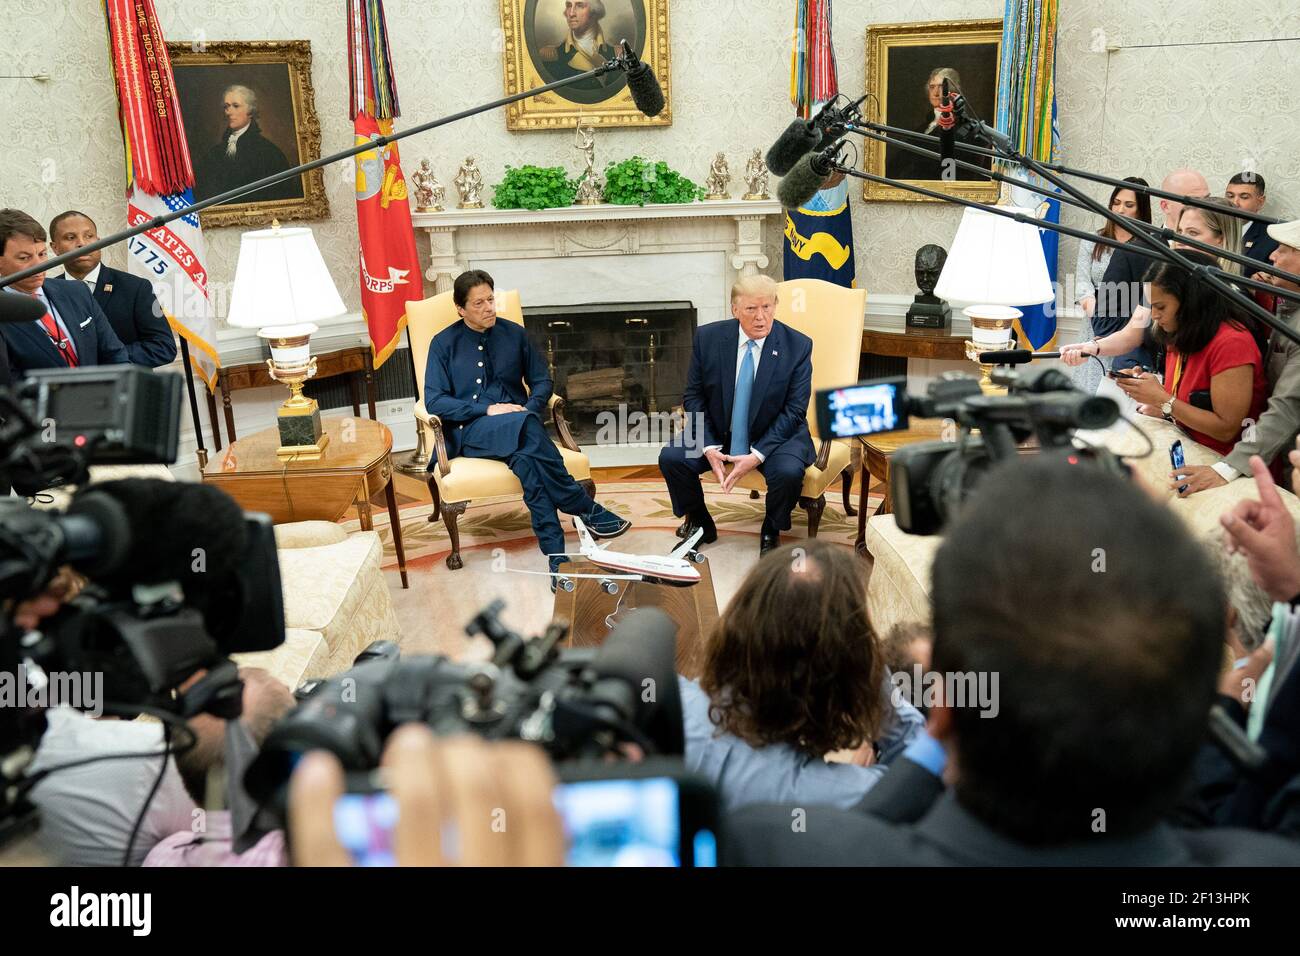 President Donald Trump joined by Prime Minister Imran Khan of the Islamic Republic of Pakistan speaks with reporters during their bilateral meeting Monday July 22 2019 in the Oval Office of the White House. Stock Photo